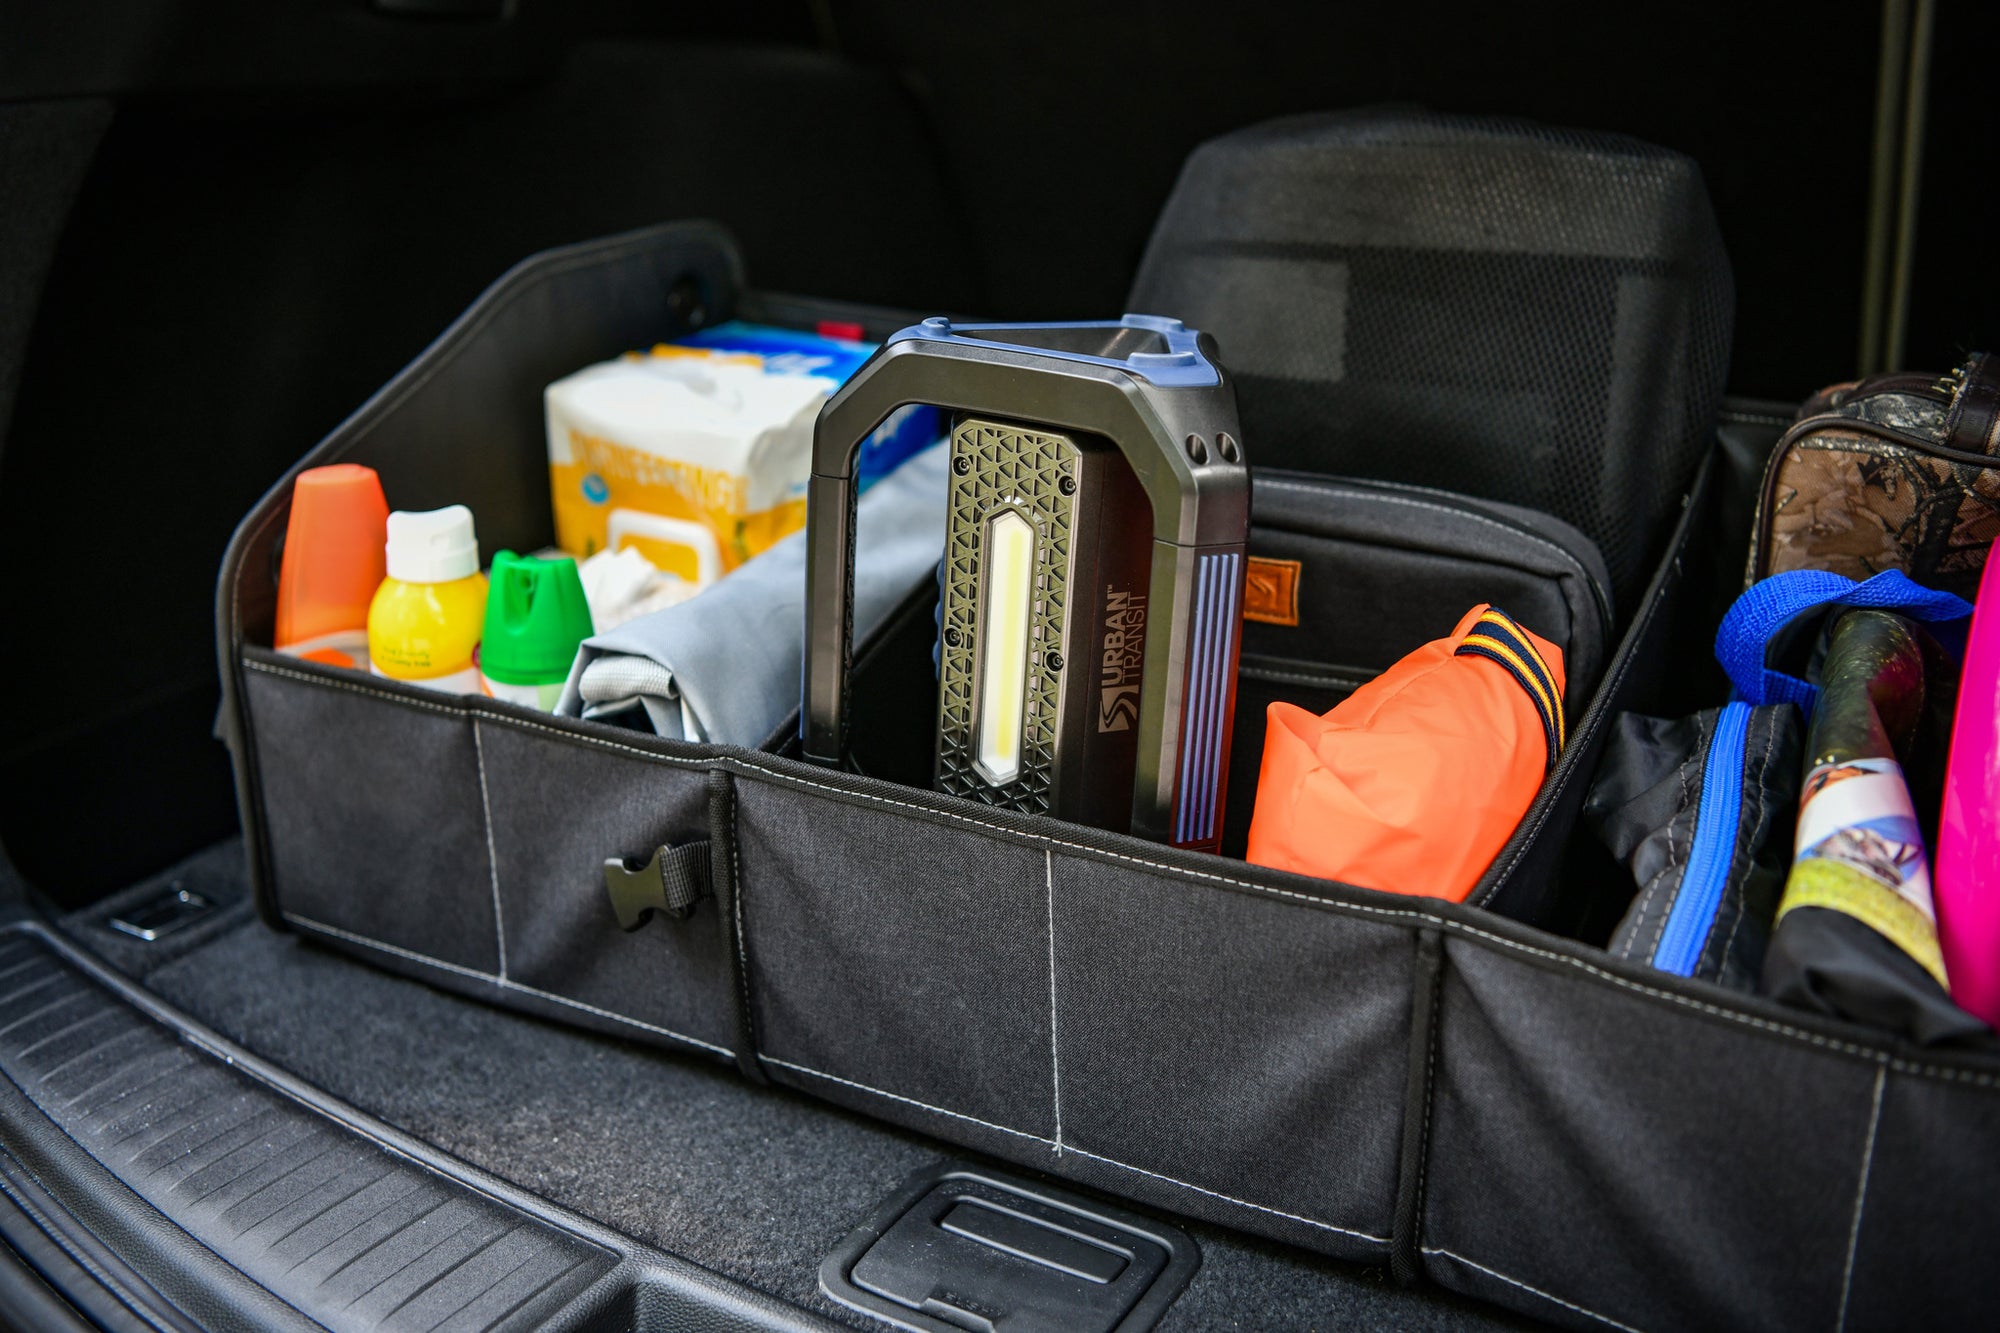 Every car should have these emergency items in the trunk